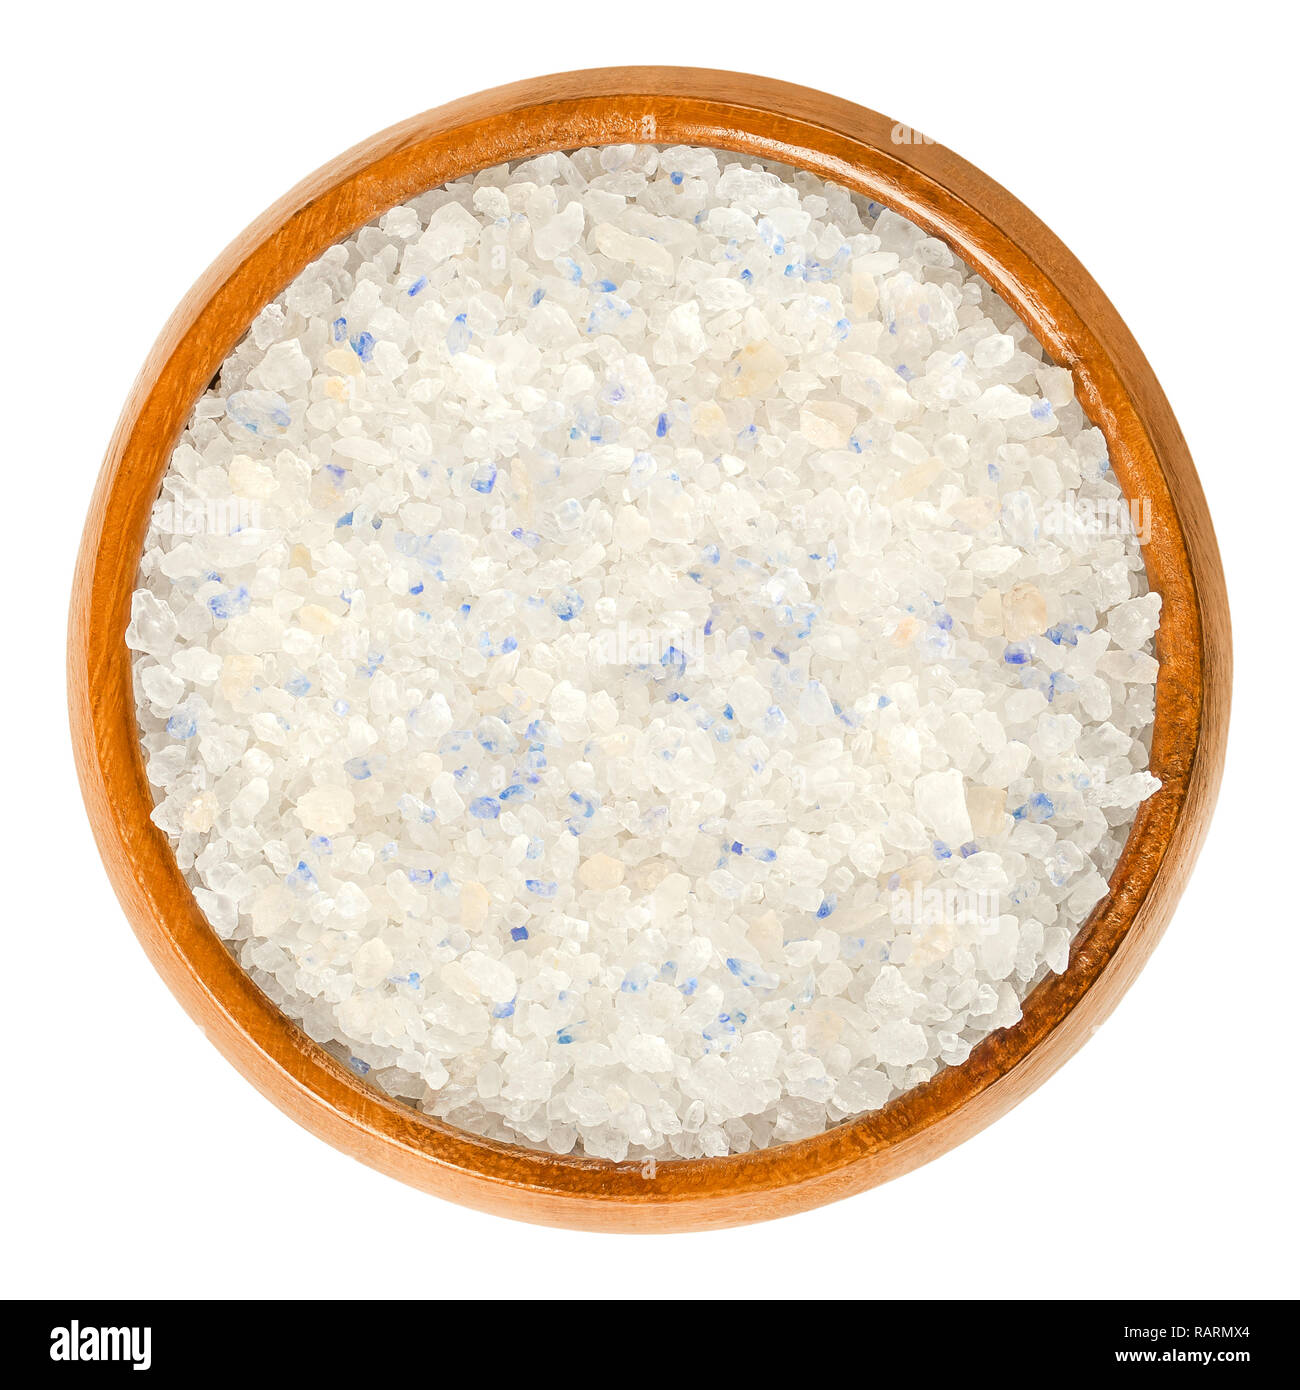 Persian Blue Salt in wooden bowl. Fine rock salt from Iran. Blue color occurs during forming the crystalline structure, caused by an optical illusion. Stock Photo